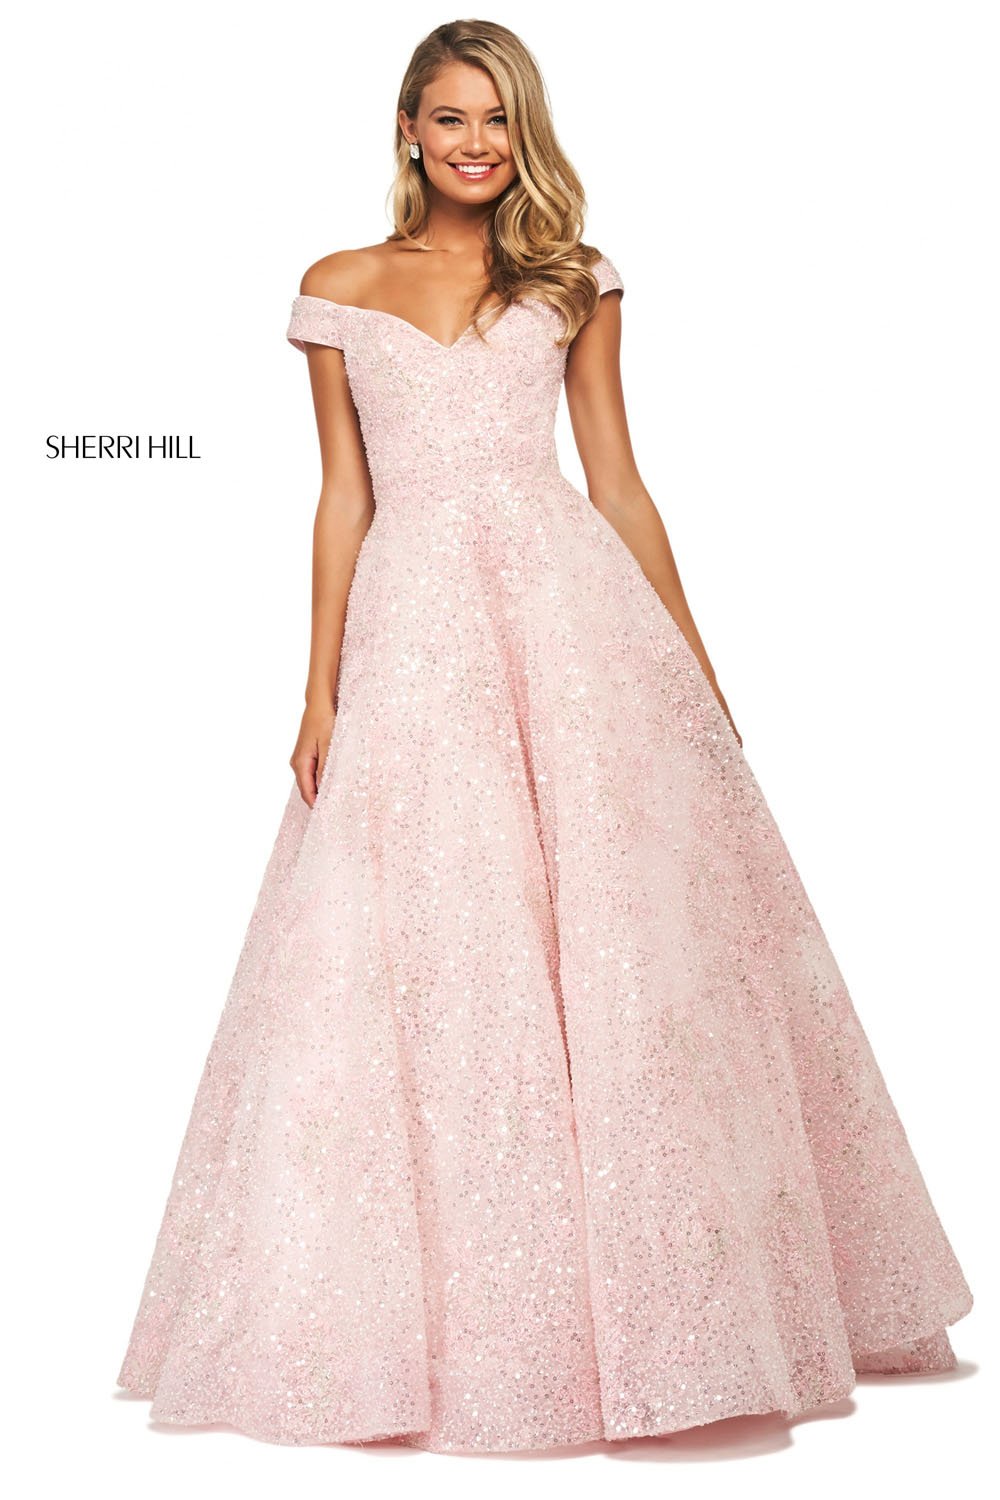 Sherri Hill 53758 dress images in these colors: Blush, Light Blue.